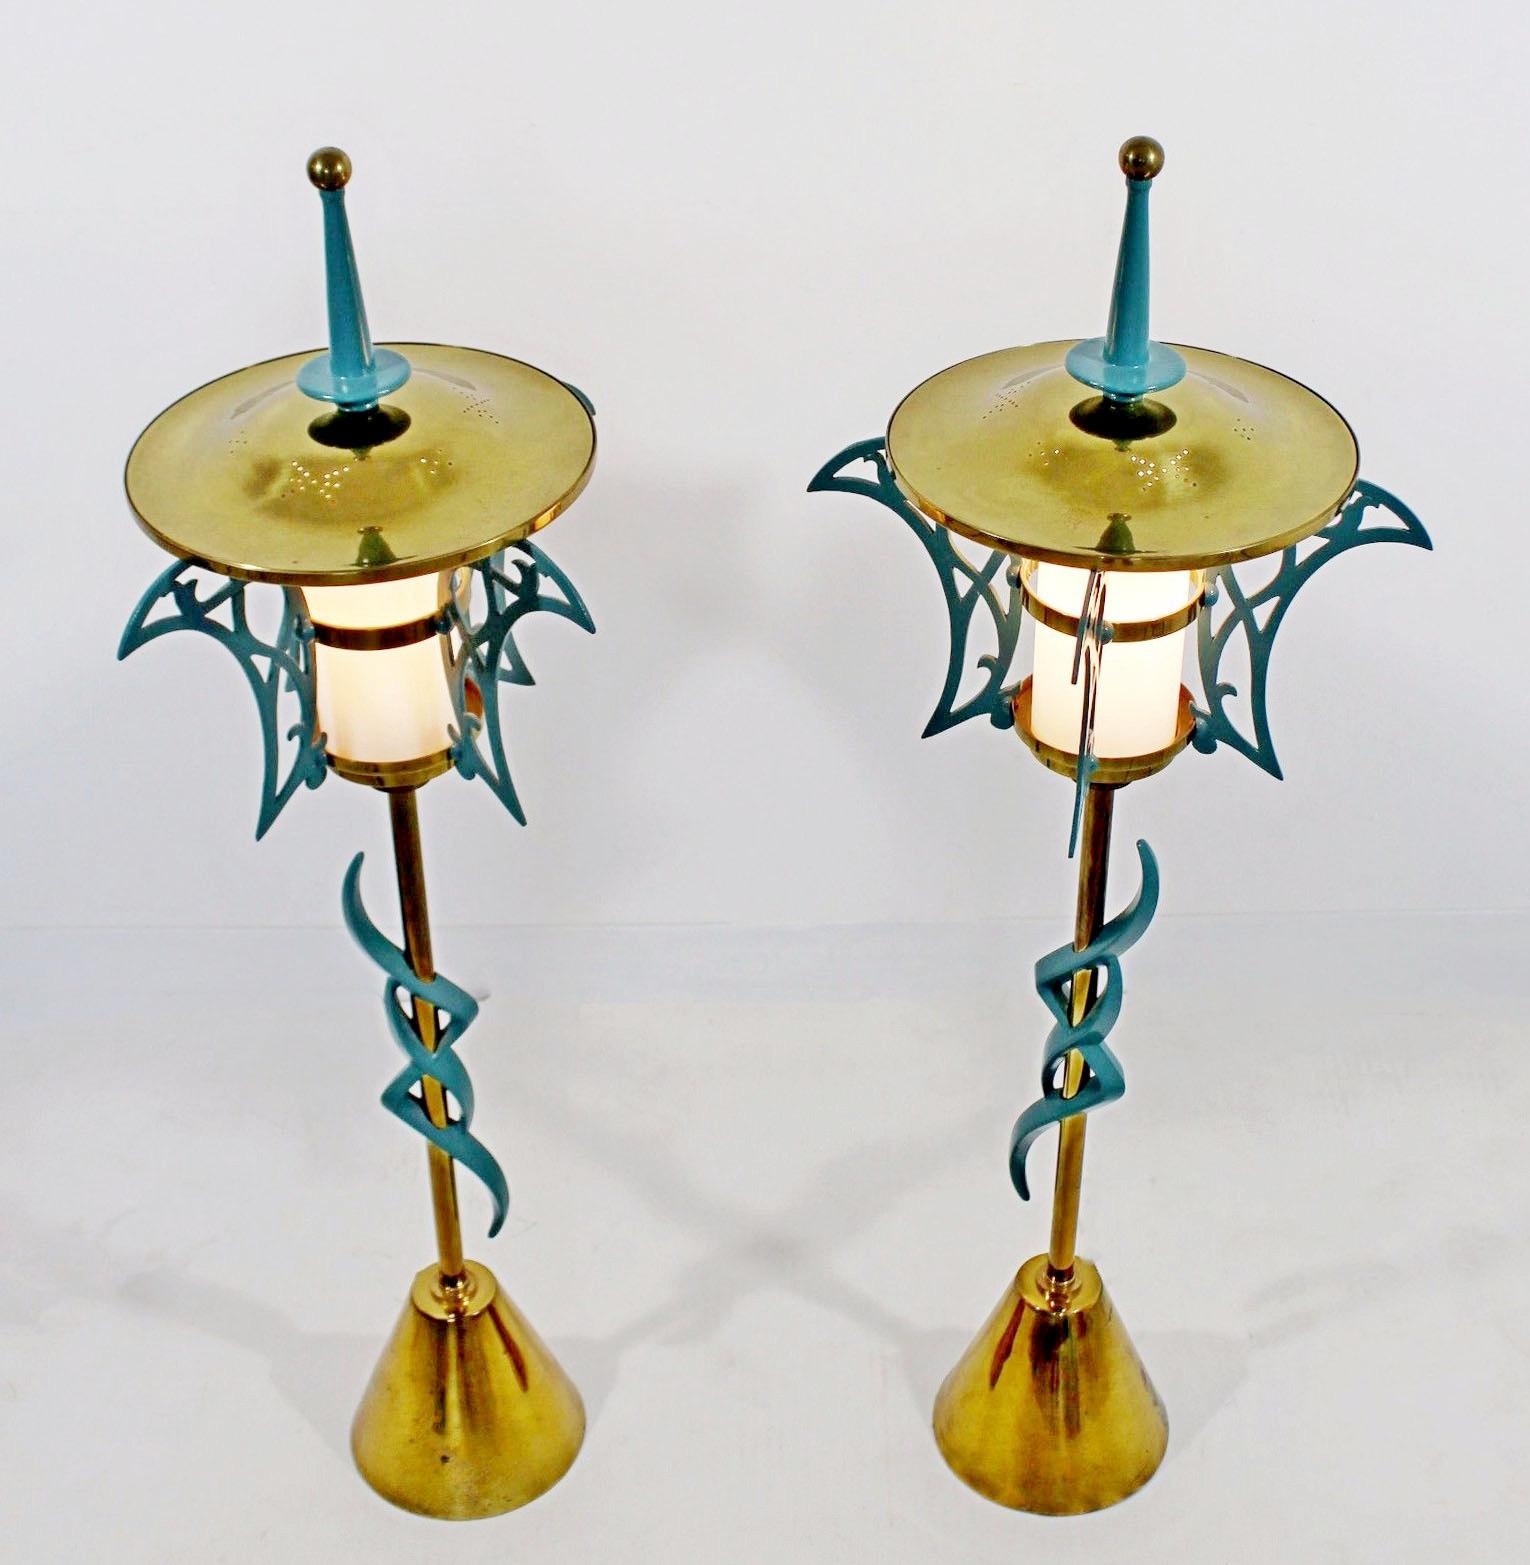 American Mid-Century Modern Rembrandt Pair of Solid Brass Table Lamps Cold Painted, 1957